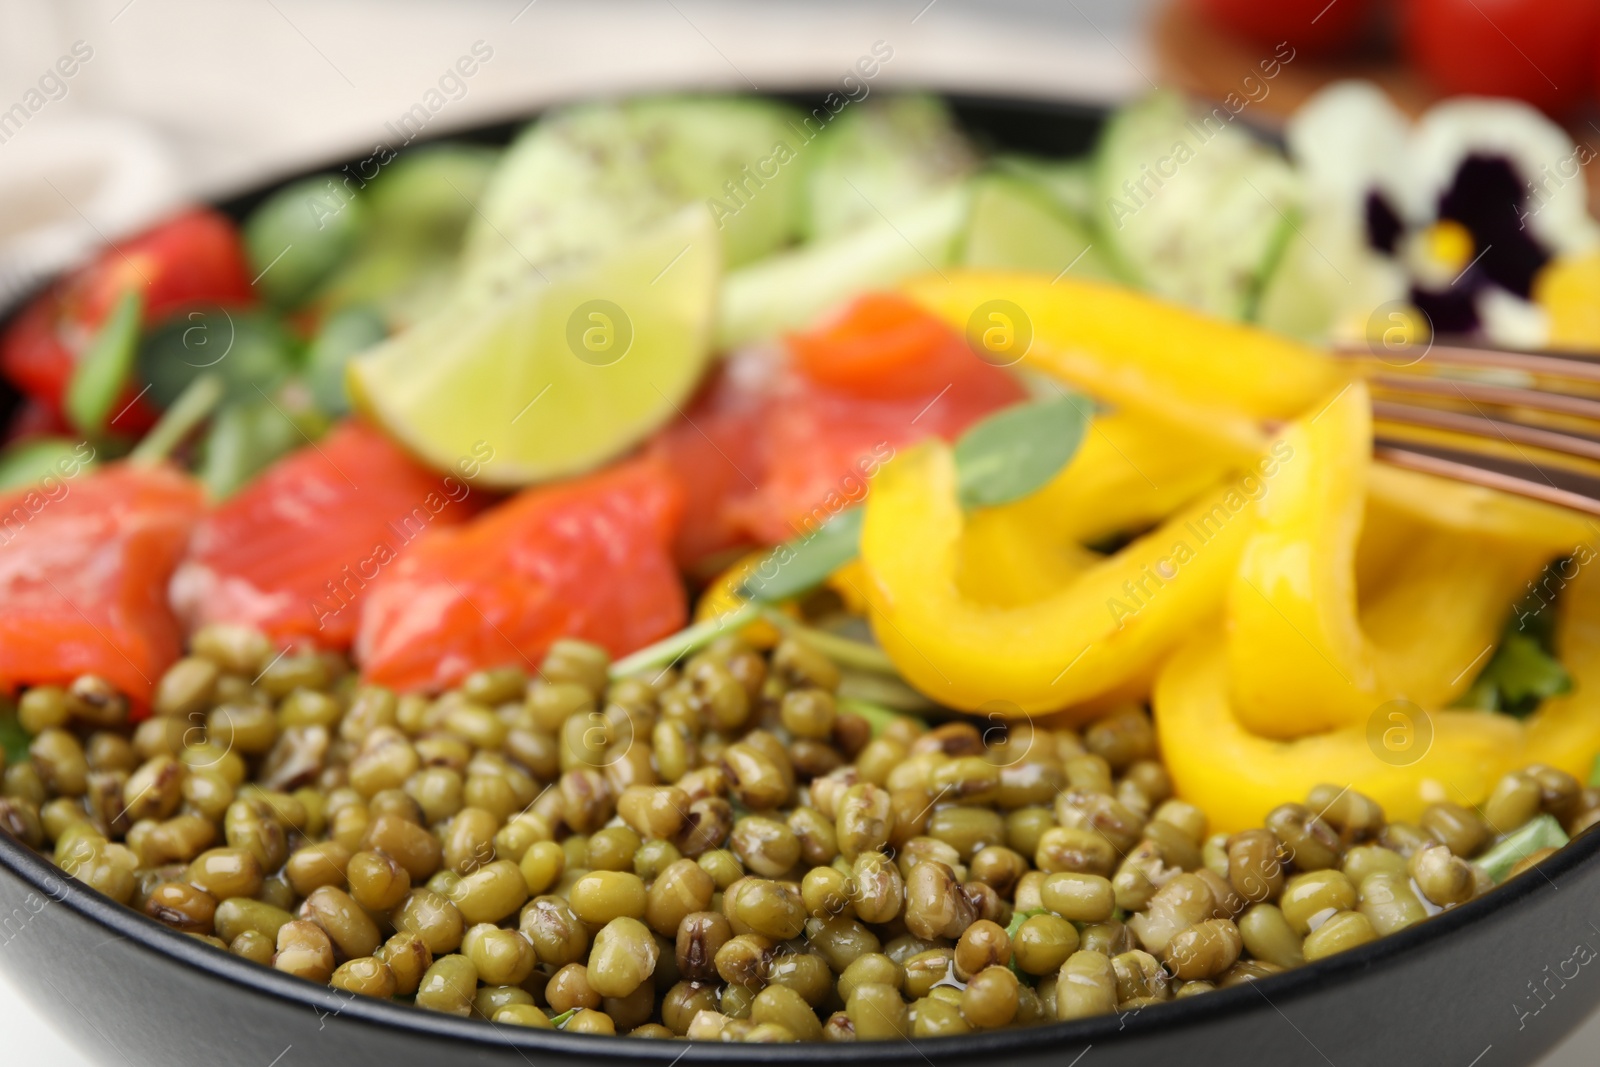 Photo of Bowl of salad with mung beans, closeup view